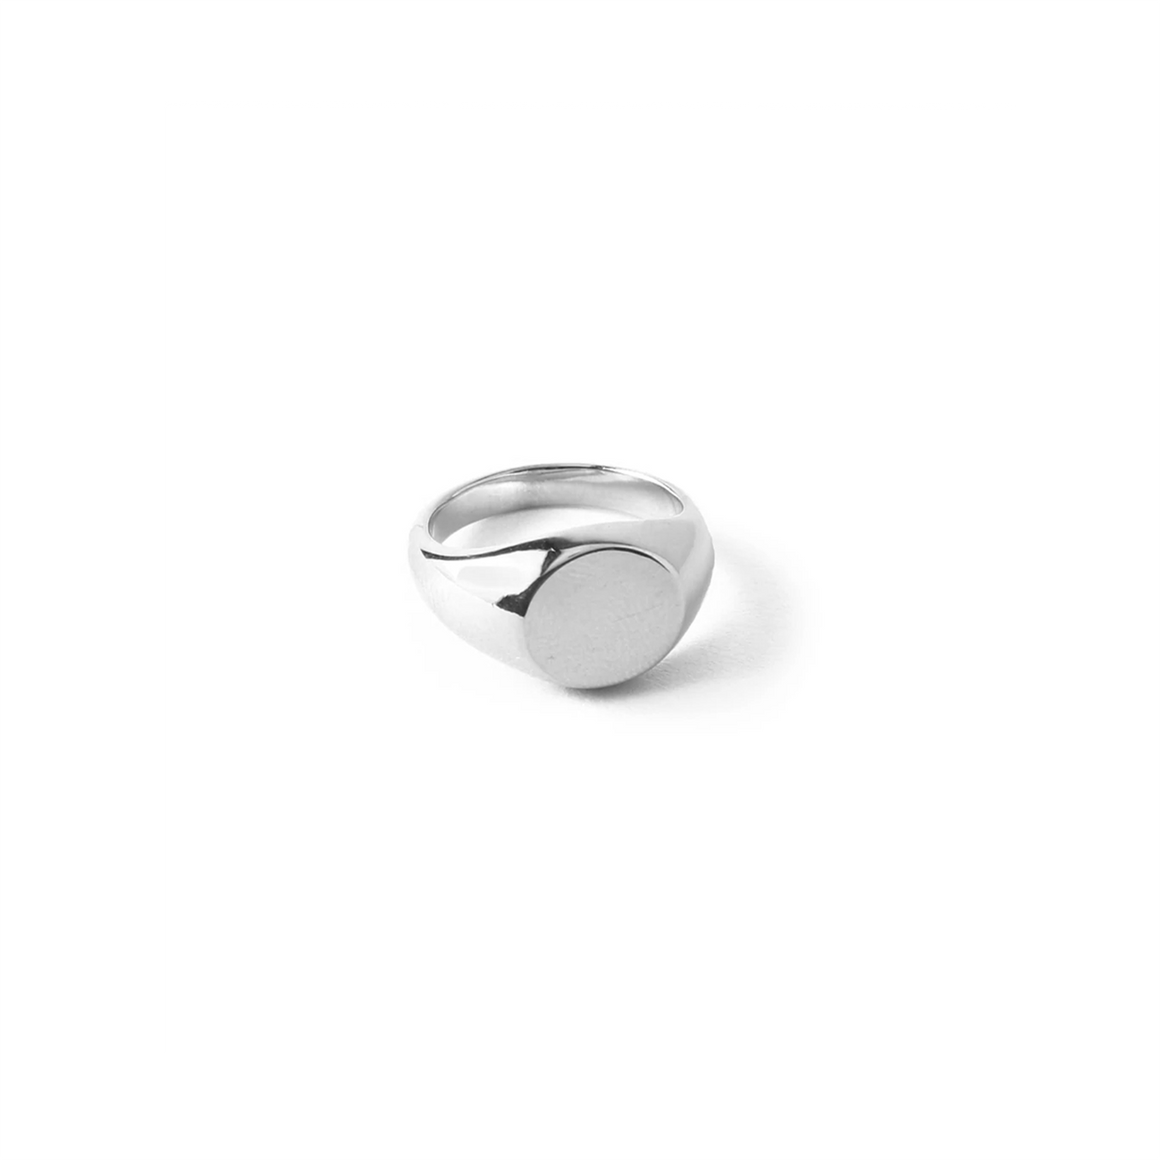 54 FLORAL CIRCLE FACE SIGNET RING - SILVER